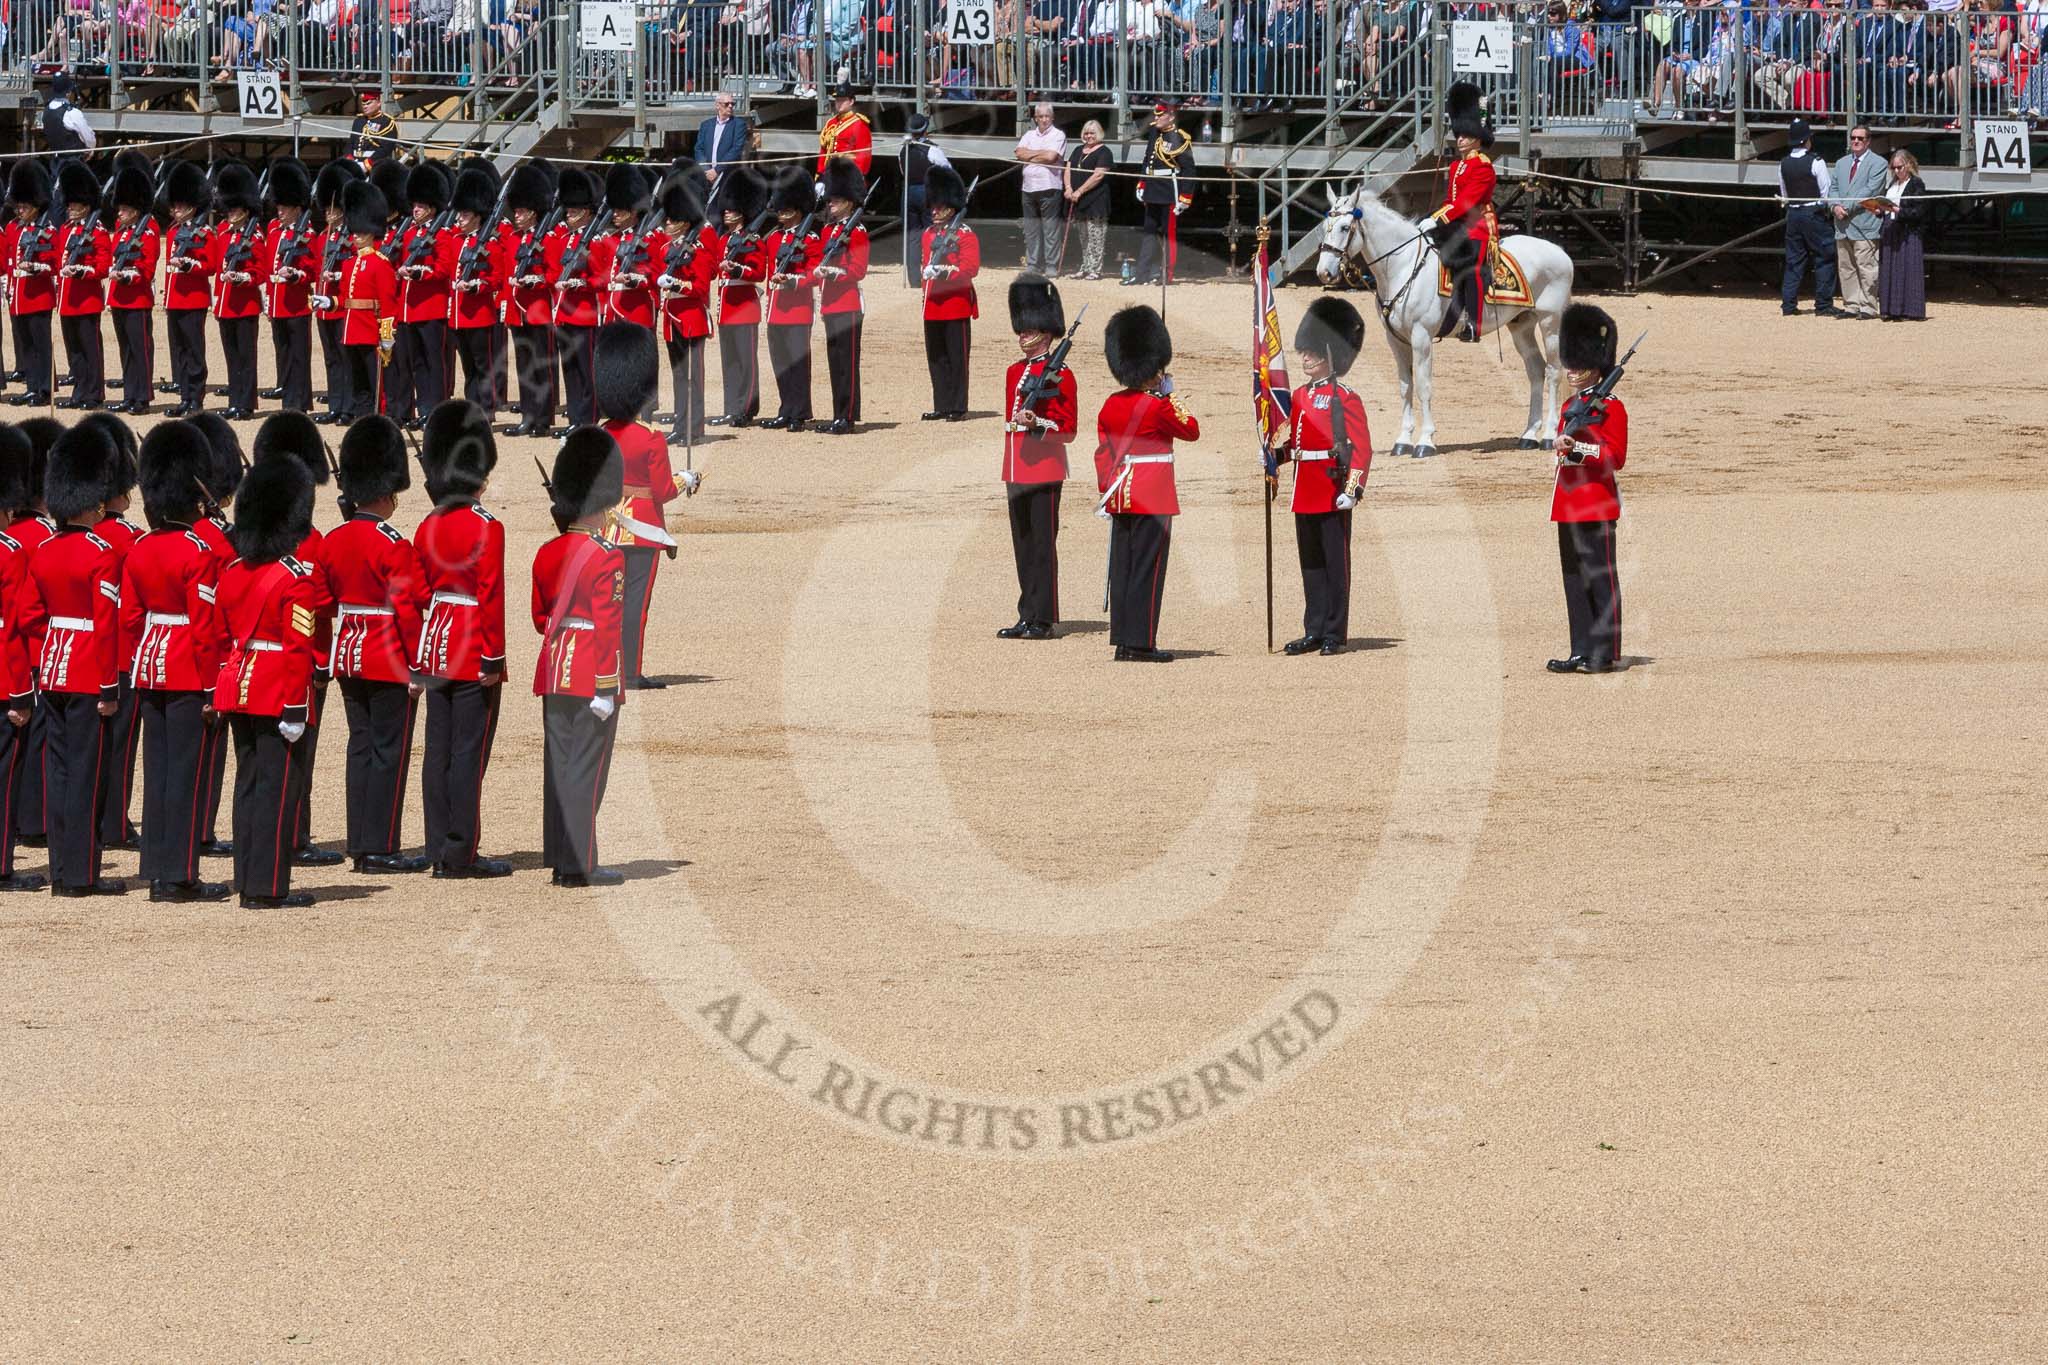 The Colonel's Review 2015.
Horse Guards Parade, Westminster,
London,

United Kingdom,
on 06 June 2015 at 11:19, image #304